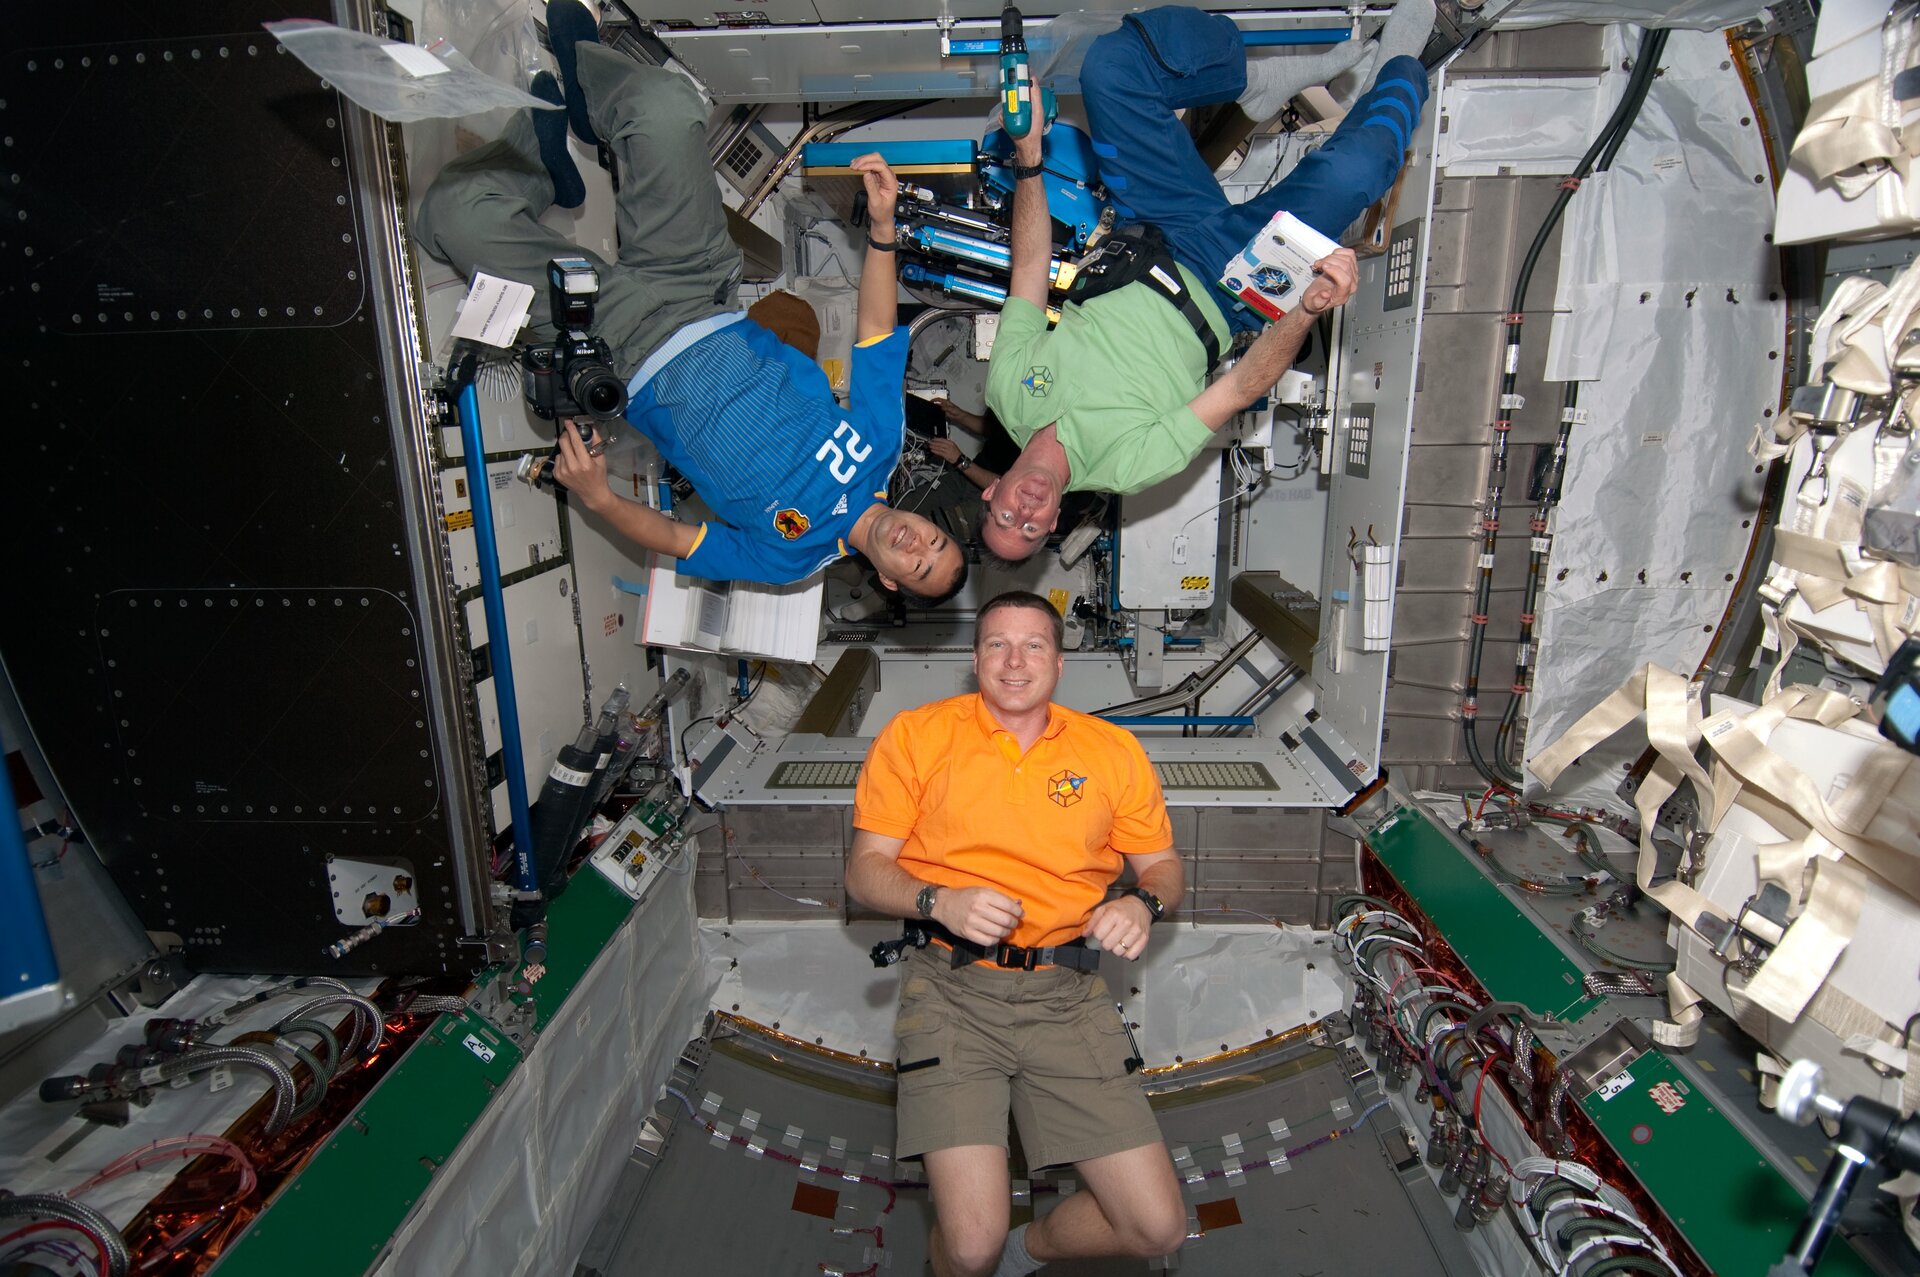 Expedition 22 astronauts in the Node-3